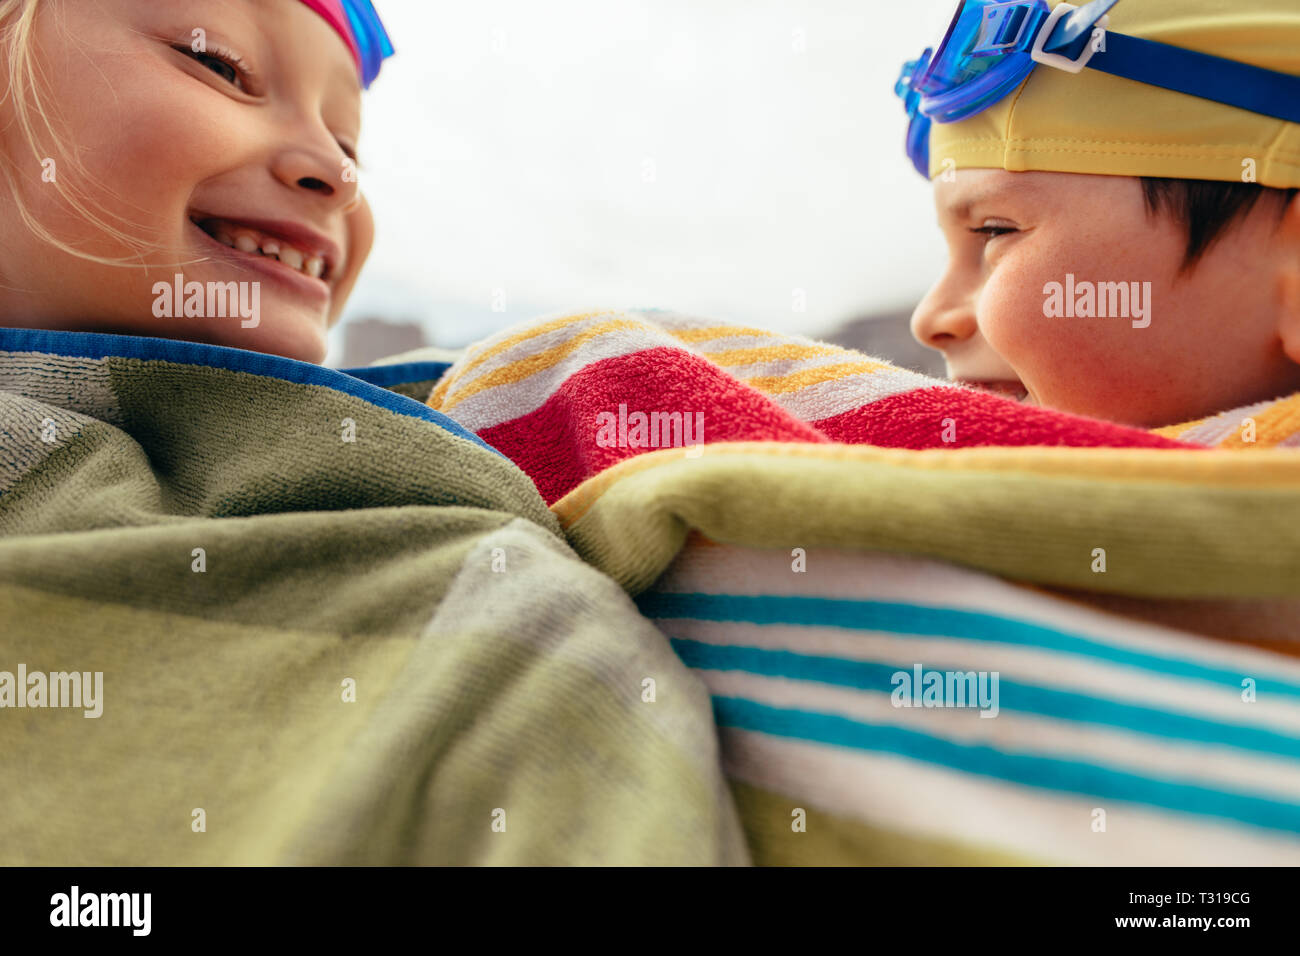 Boy and girl wrapped in towel after swimming training. Two kids having fun after swimming. Stock Photo